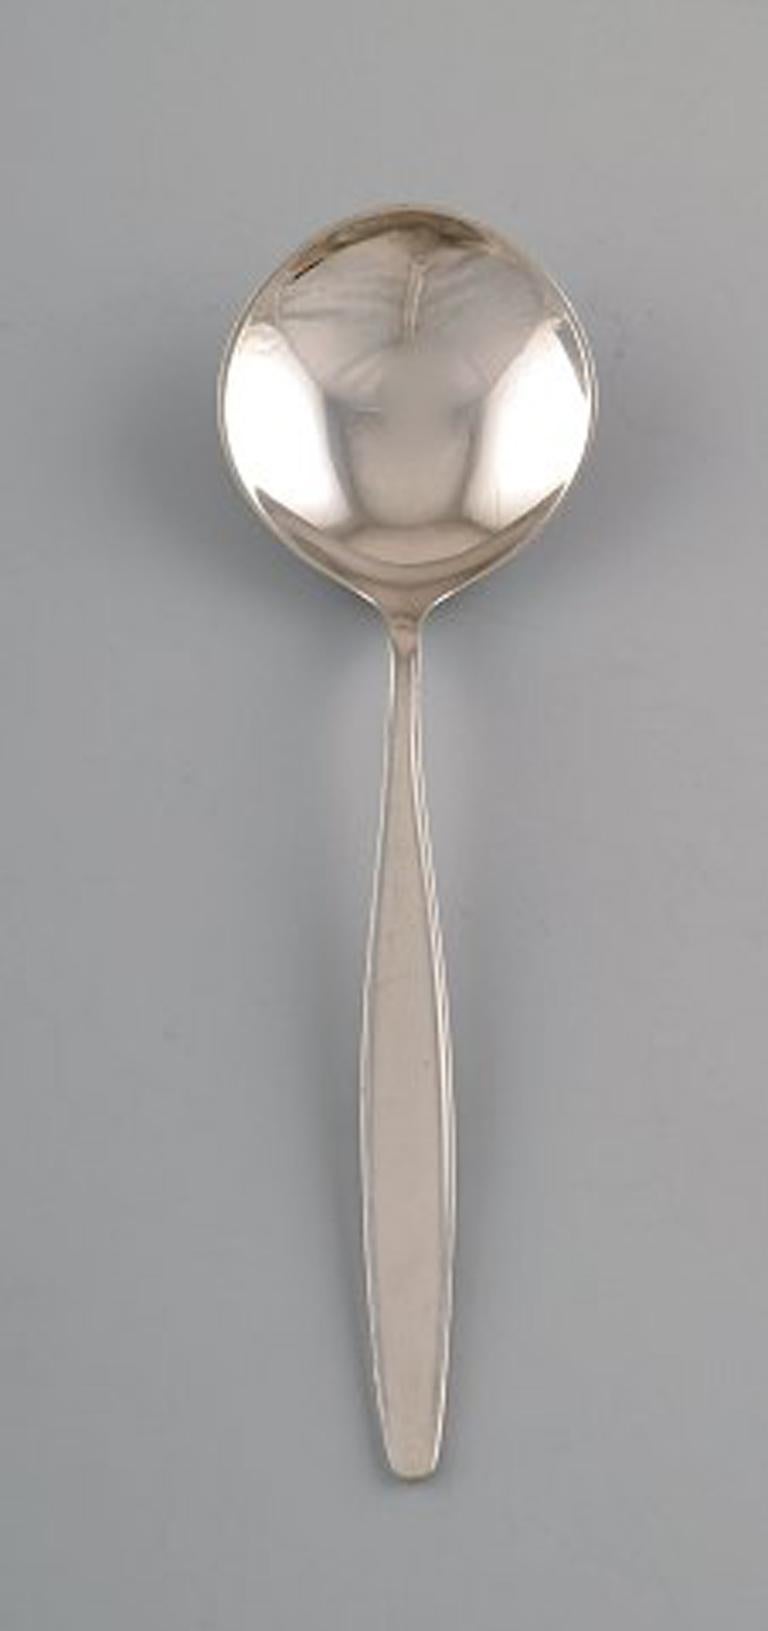 Georg Jensen sterling silver cypress, two bouillon spoons.
Measures 14.5 cm.
In perfect condition.
Stamped.
Designed by Tias Eckhoff 1952-1953 For Georg Jensen Silversmith, Denmark. Cypress pattern no. 99.